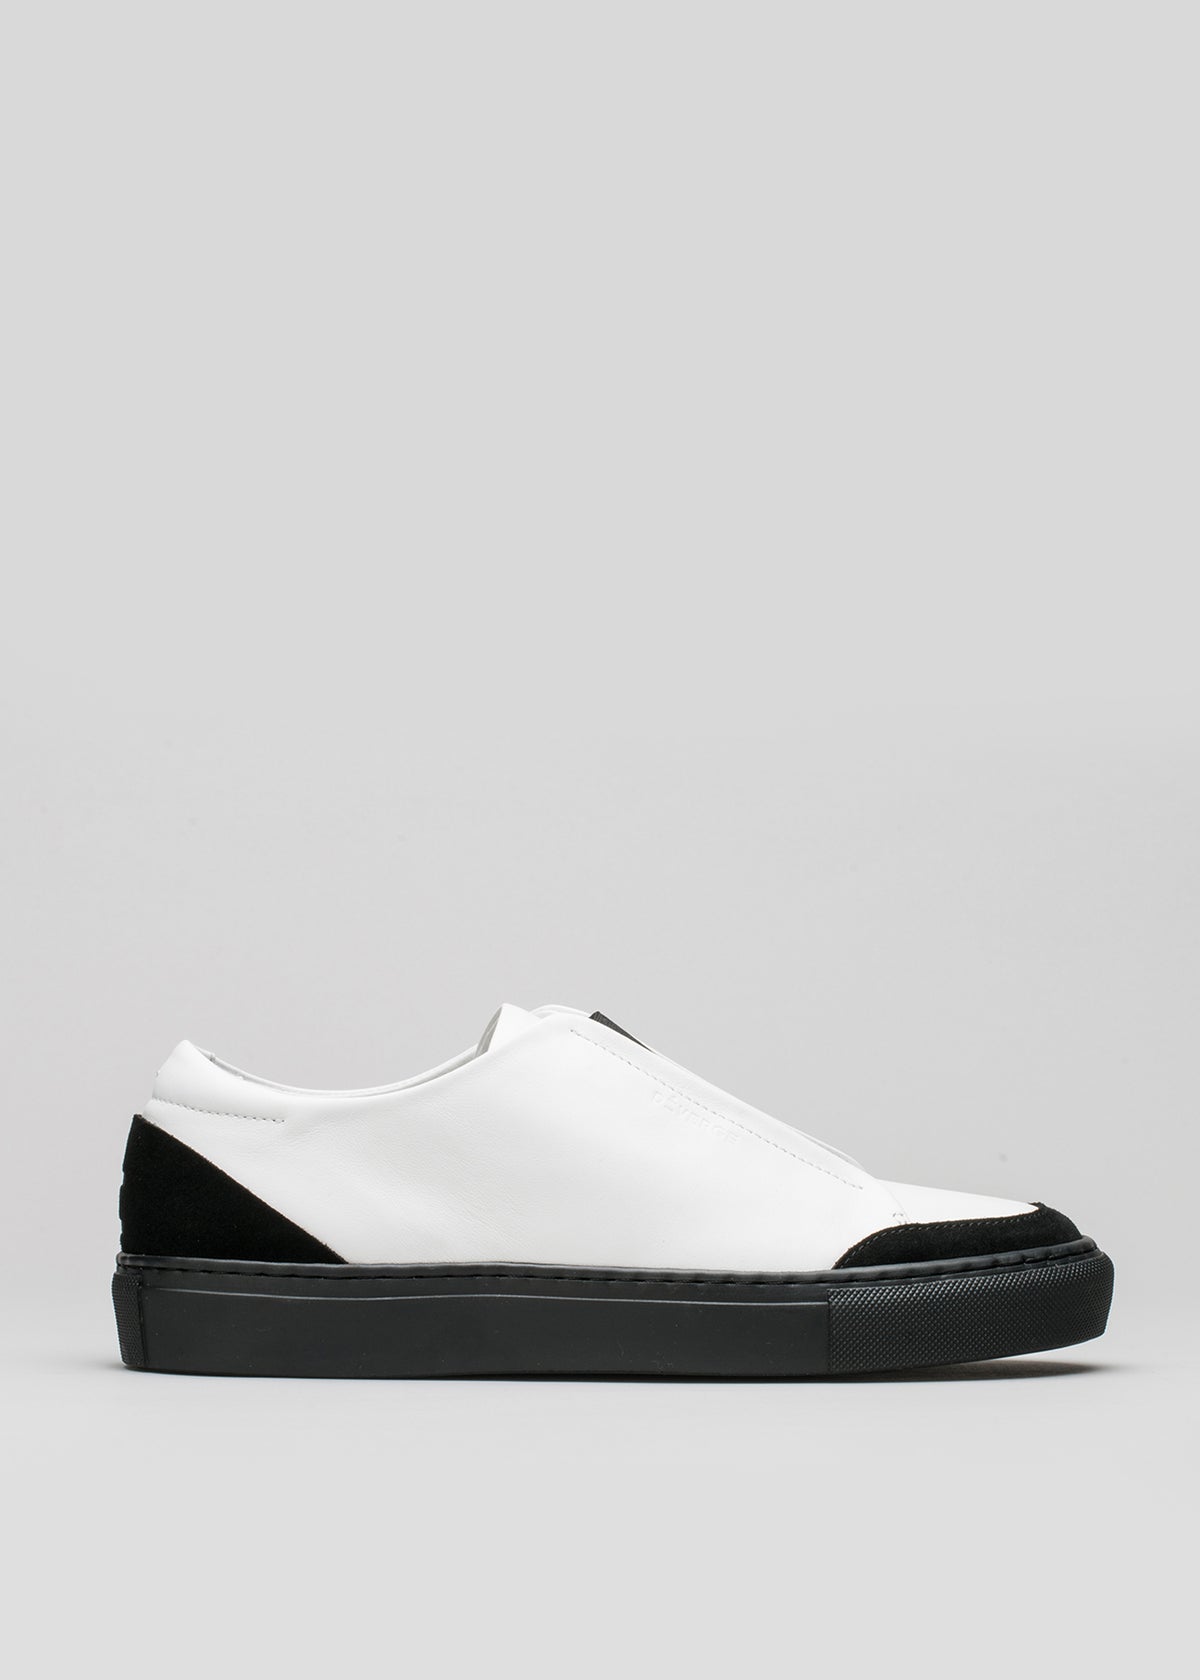 V6 White Leather w/Black slip-on sneaker with a black sole and toe cap, displayed against a light gray background.